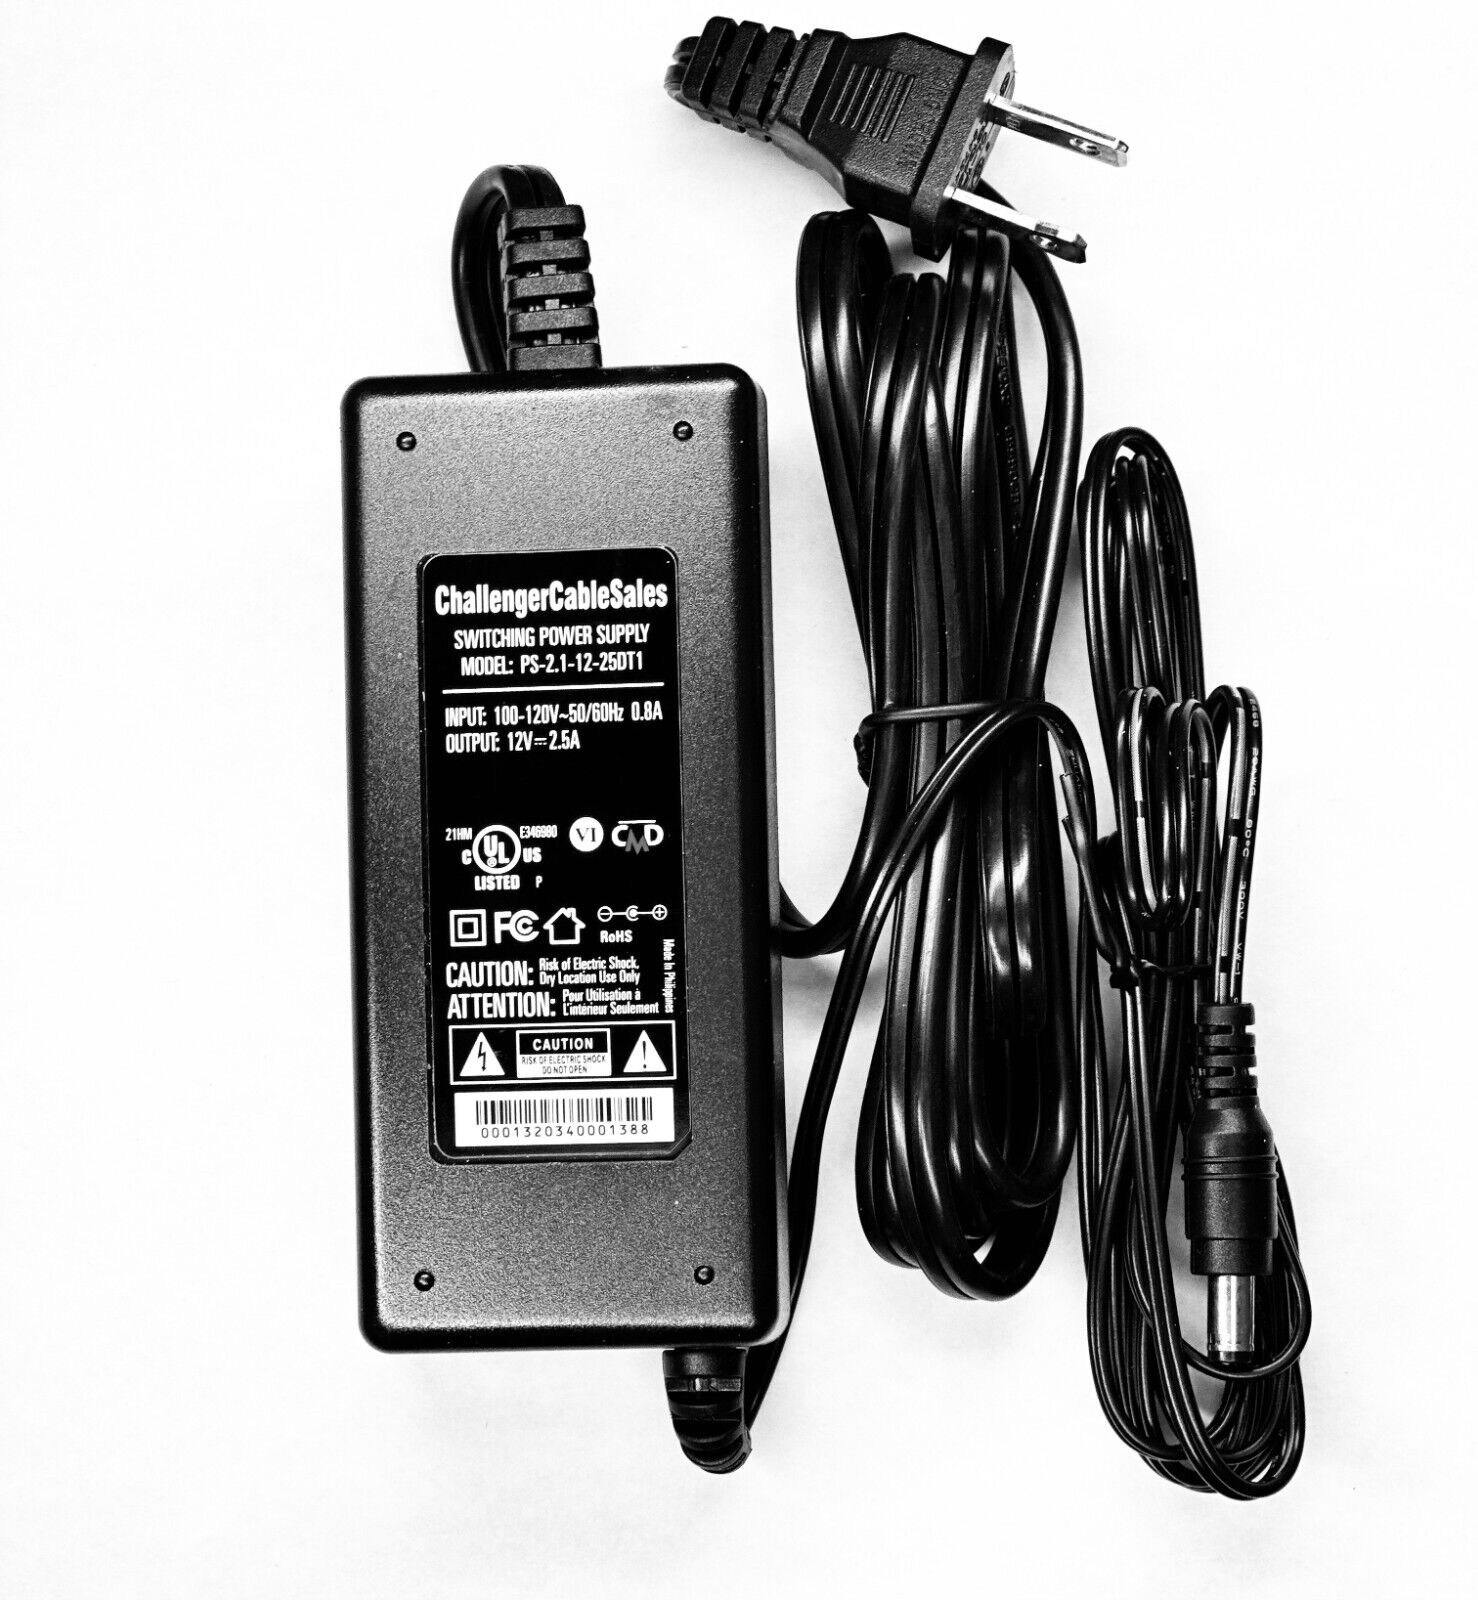 *Brand NEW*PS-2.1-12-25DT1 12V 2.5A AC Adapter Challenger Cable Sales Switching Power Supply